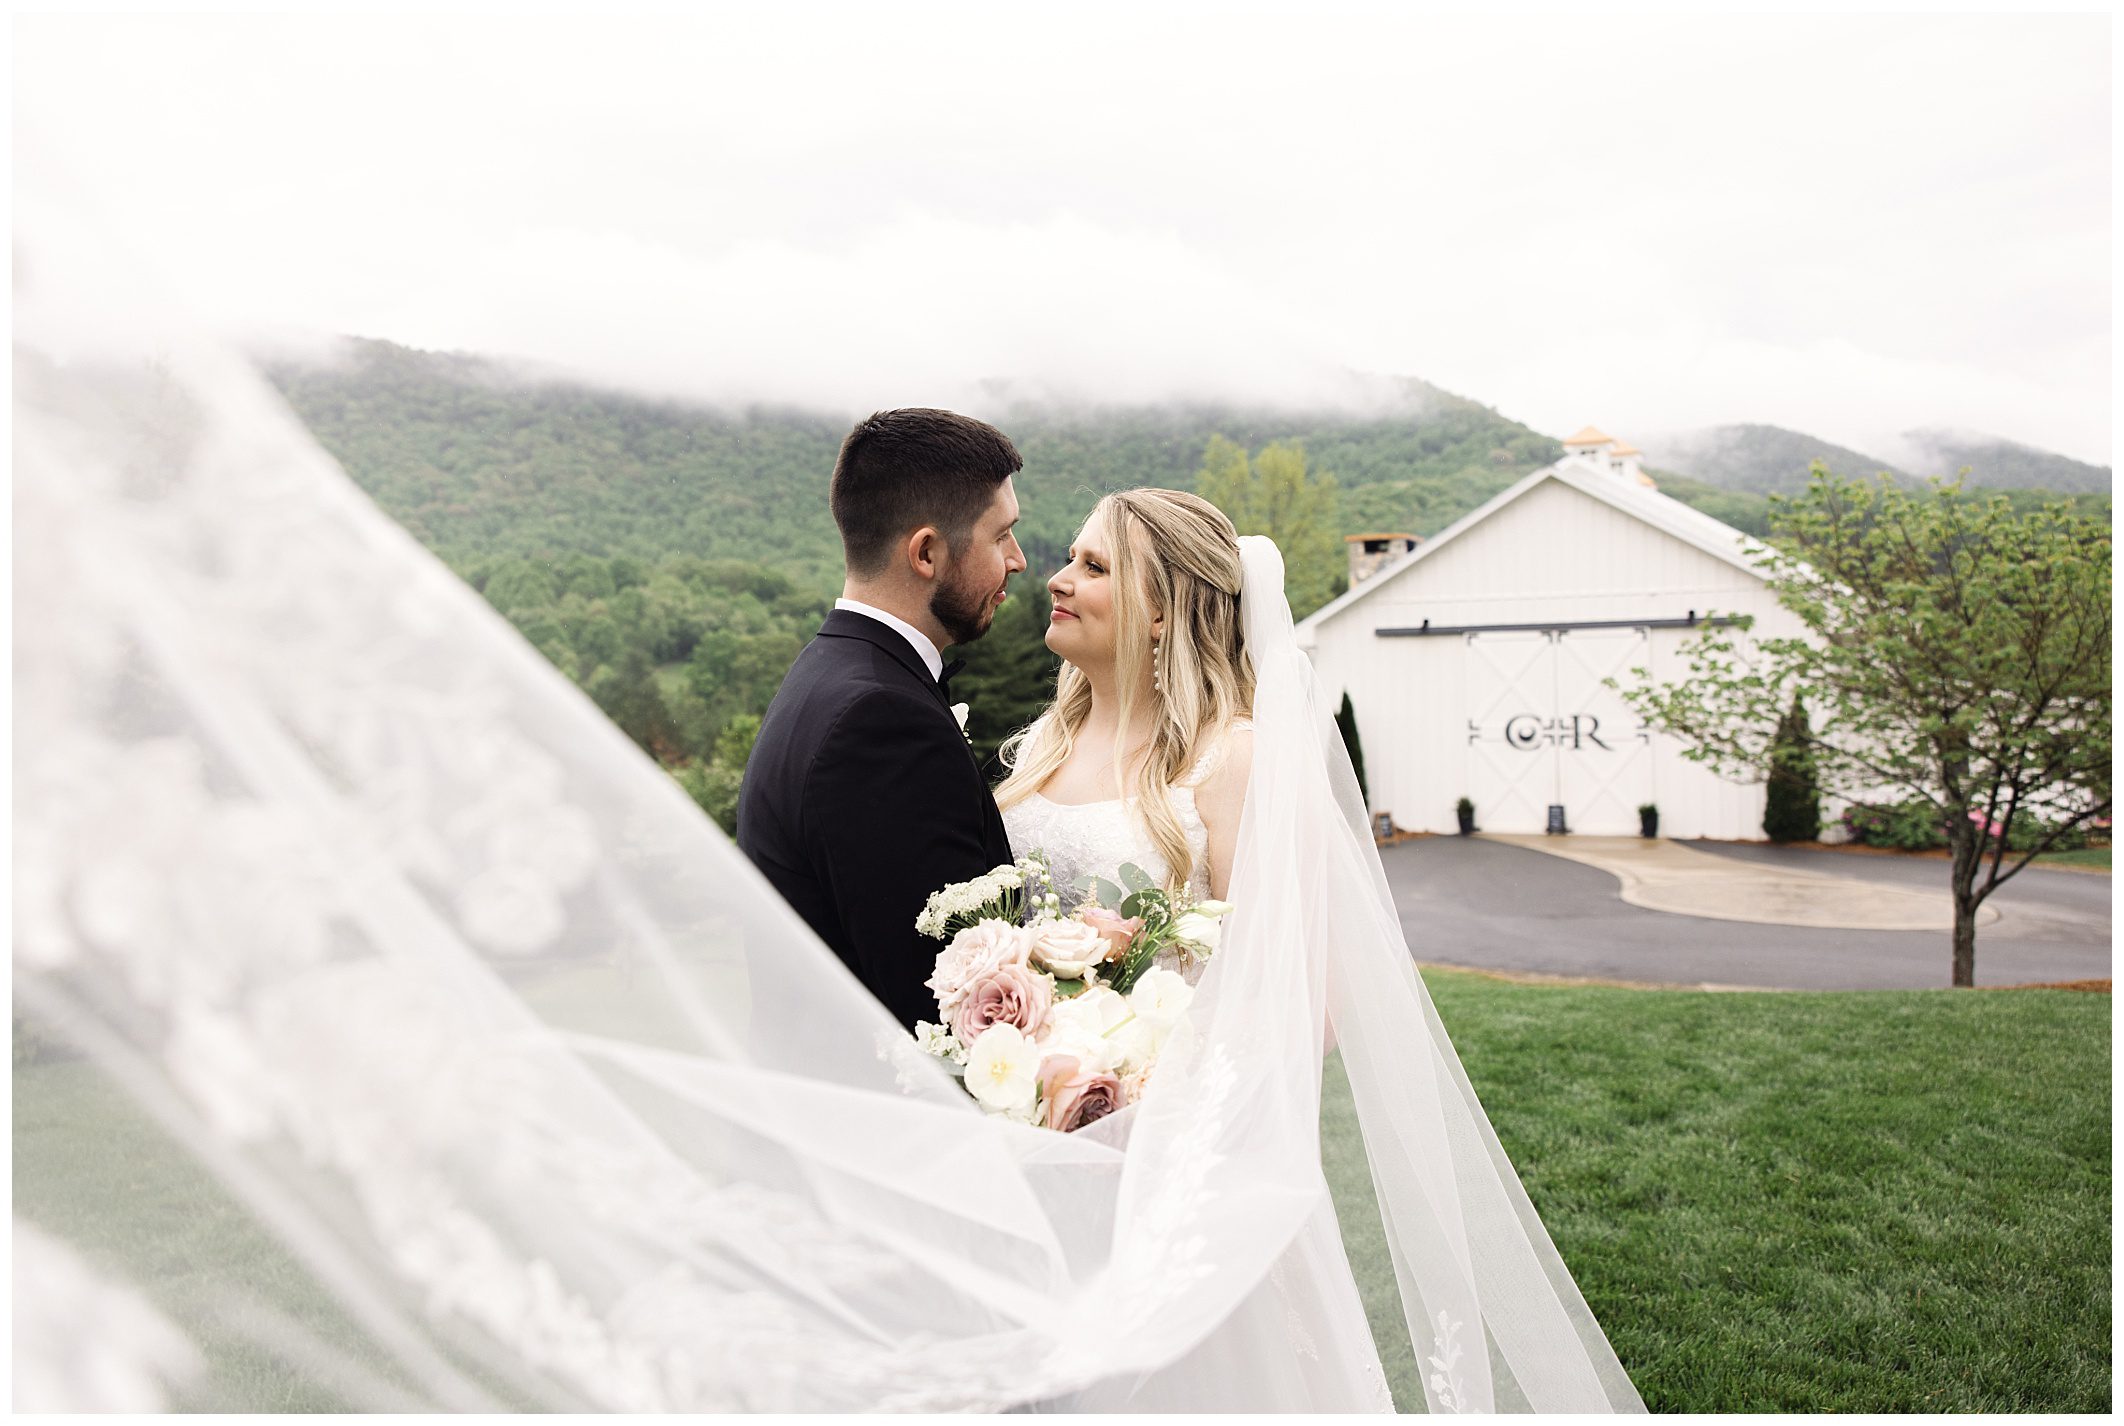 Bride and groom exchanging a loving gaze outdoors with a mountain backdrop at Chestnut Ridge, framed by the bride's flowing veil.